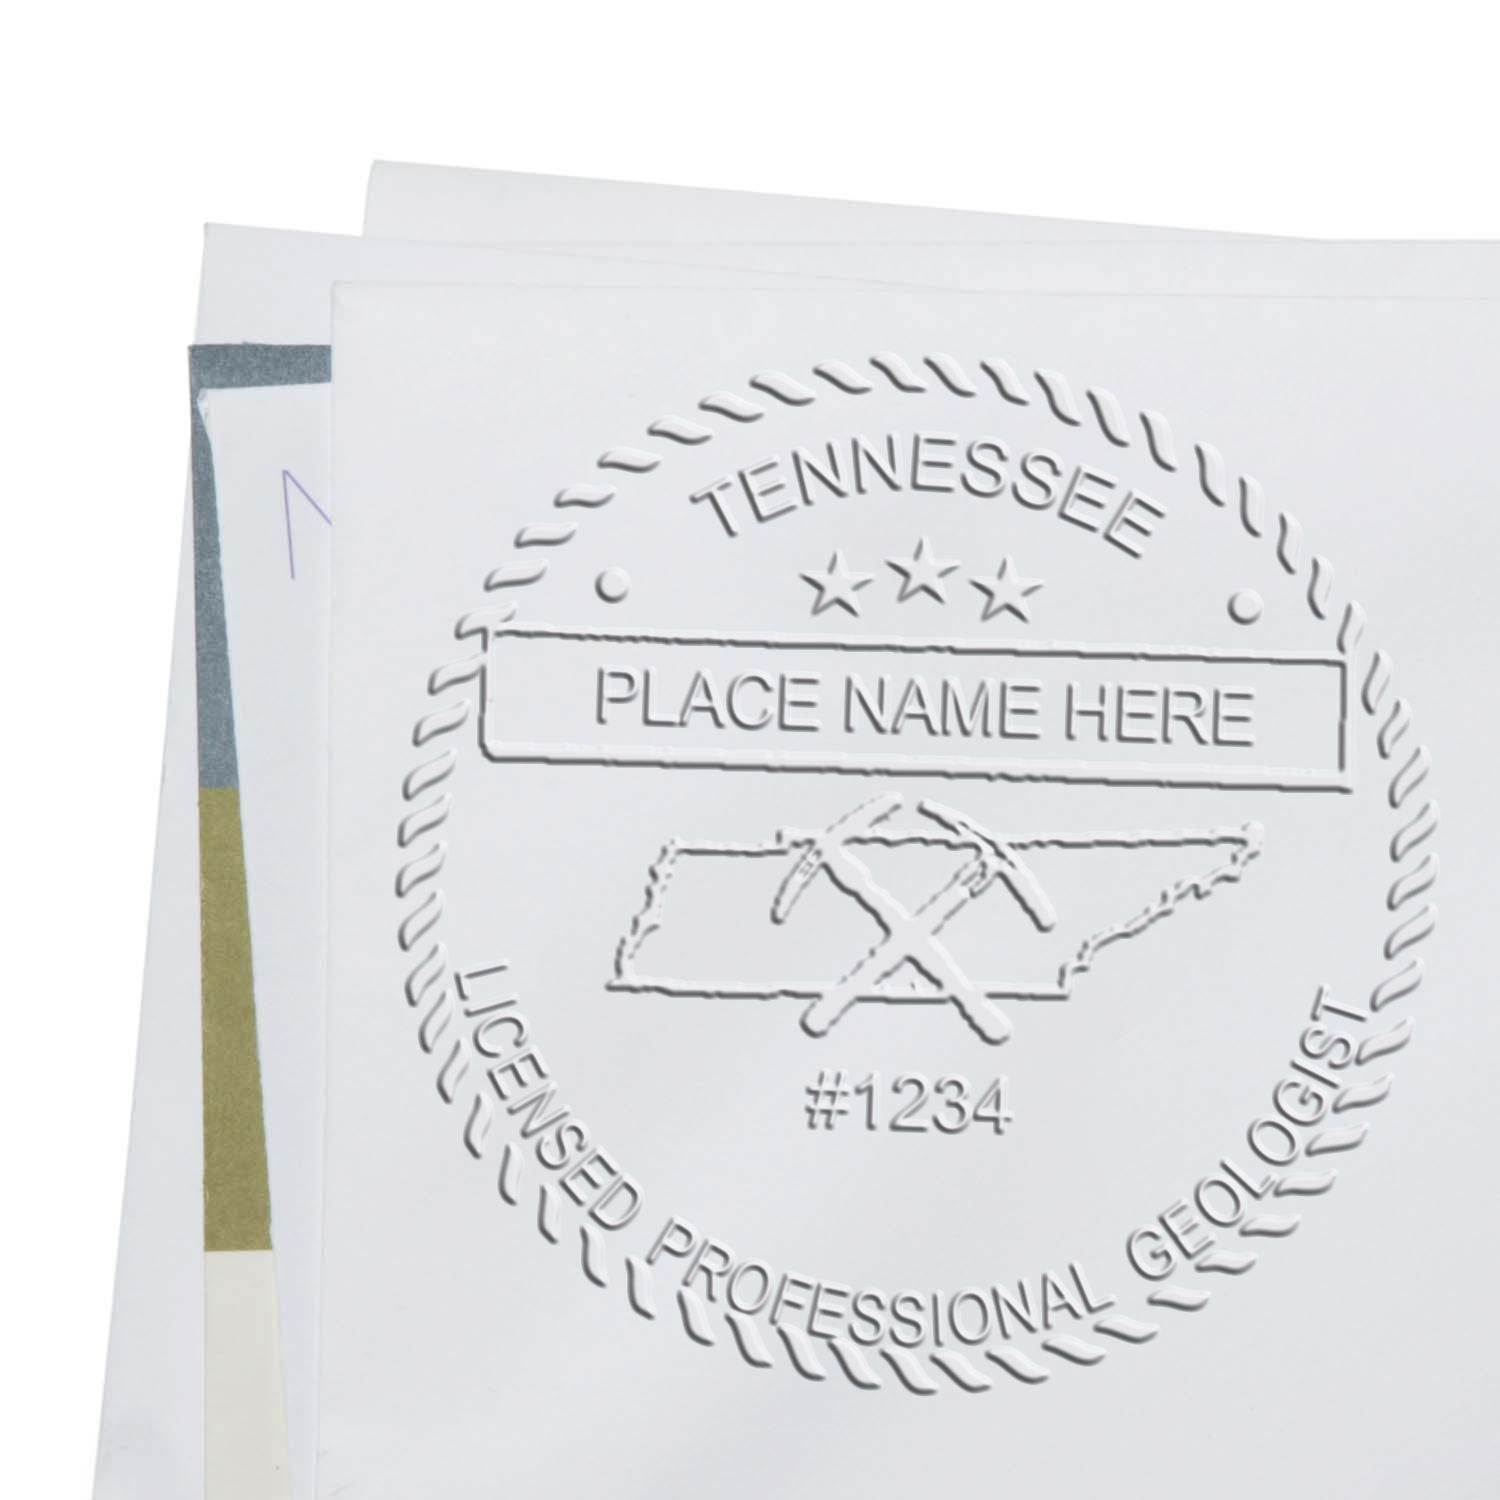 A stamped imprint of the Tennessee Geologist Desk Seal in this stylish lifestyle photo, setting the tone for a unique and personalized product.